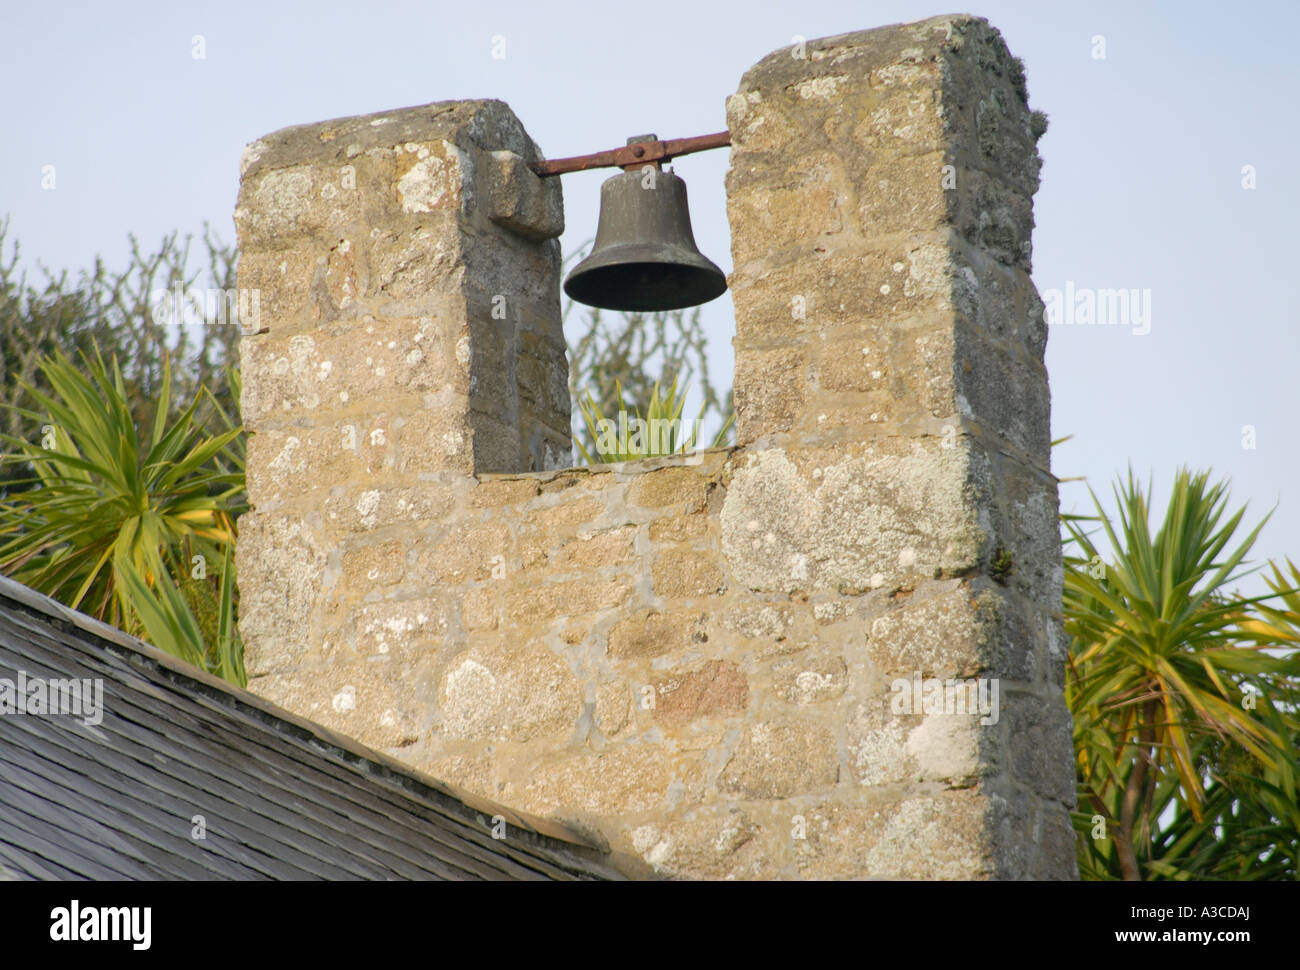 The simple stone bell tower and church bell of St Mary Old Church Stock Photo